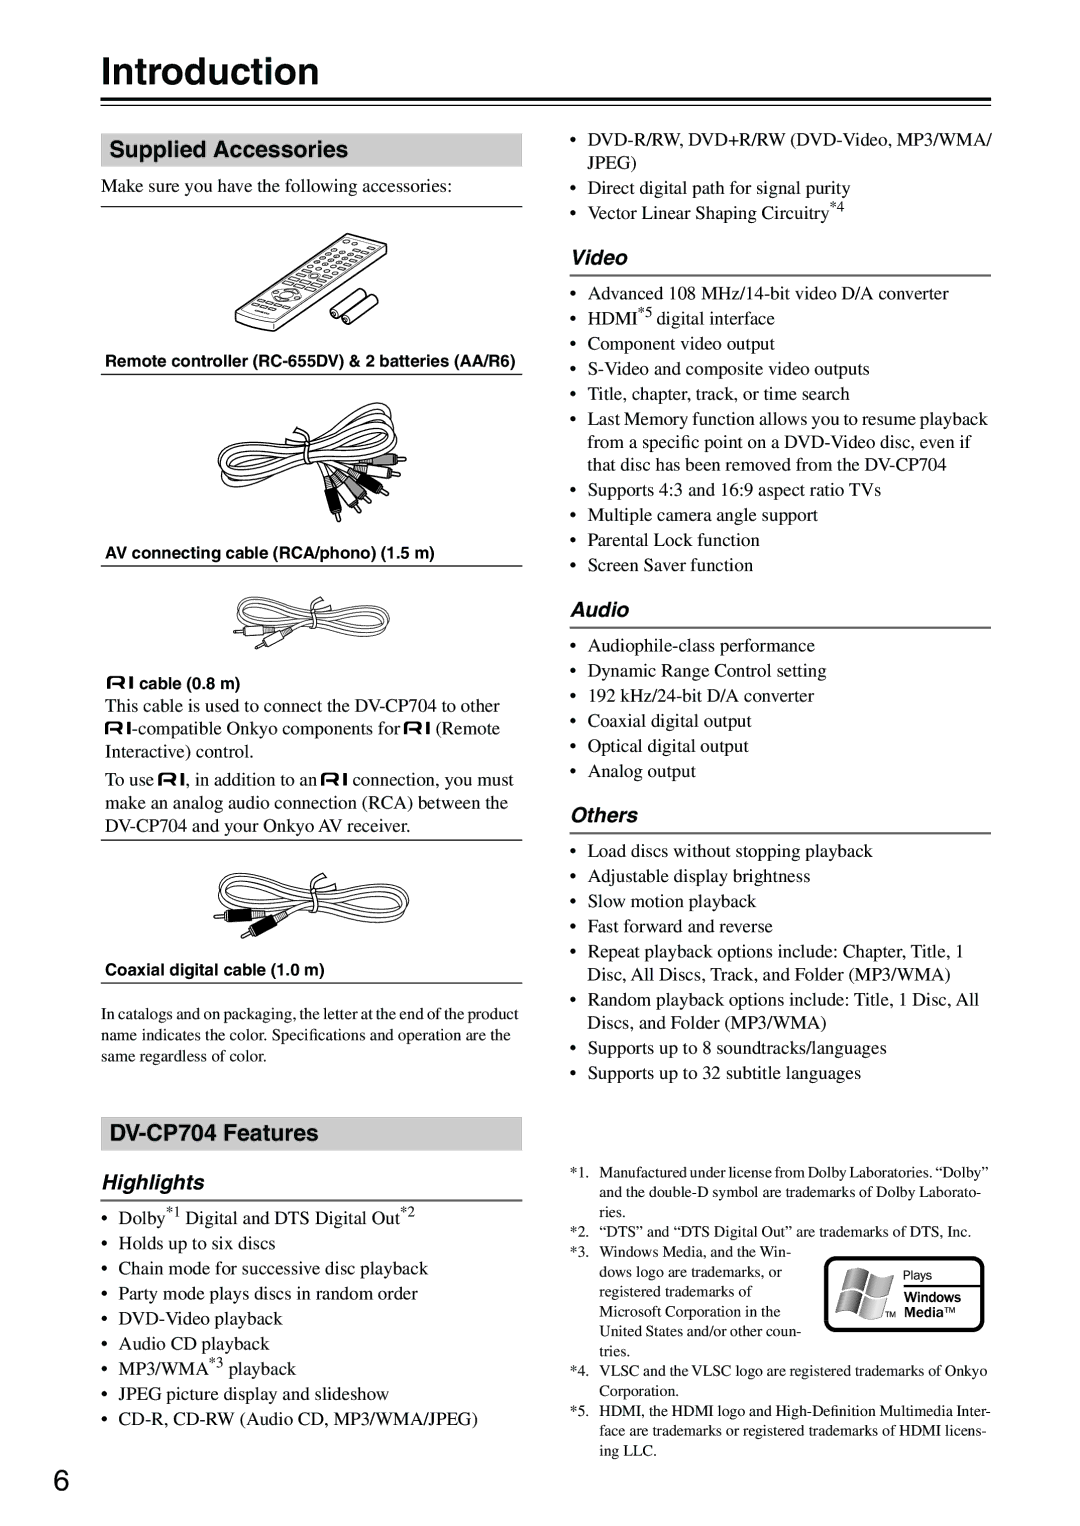 Onkyo DV-CP704S instruction manual Introduction, Supplied Accessories, DV-CP704 Features 